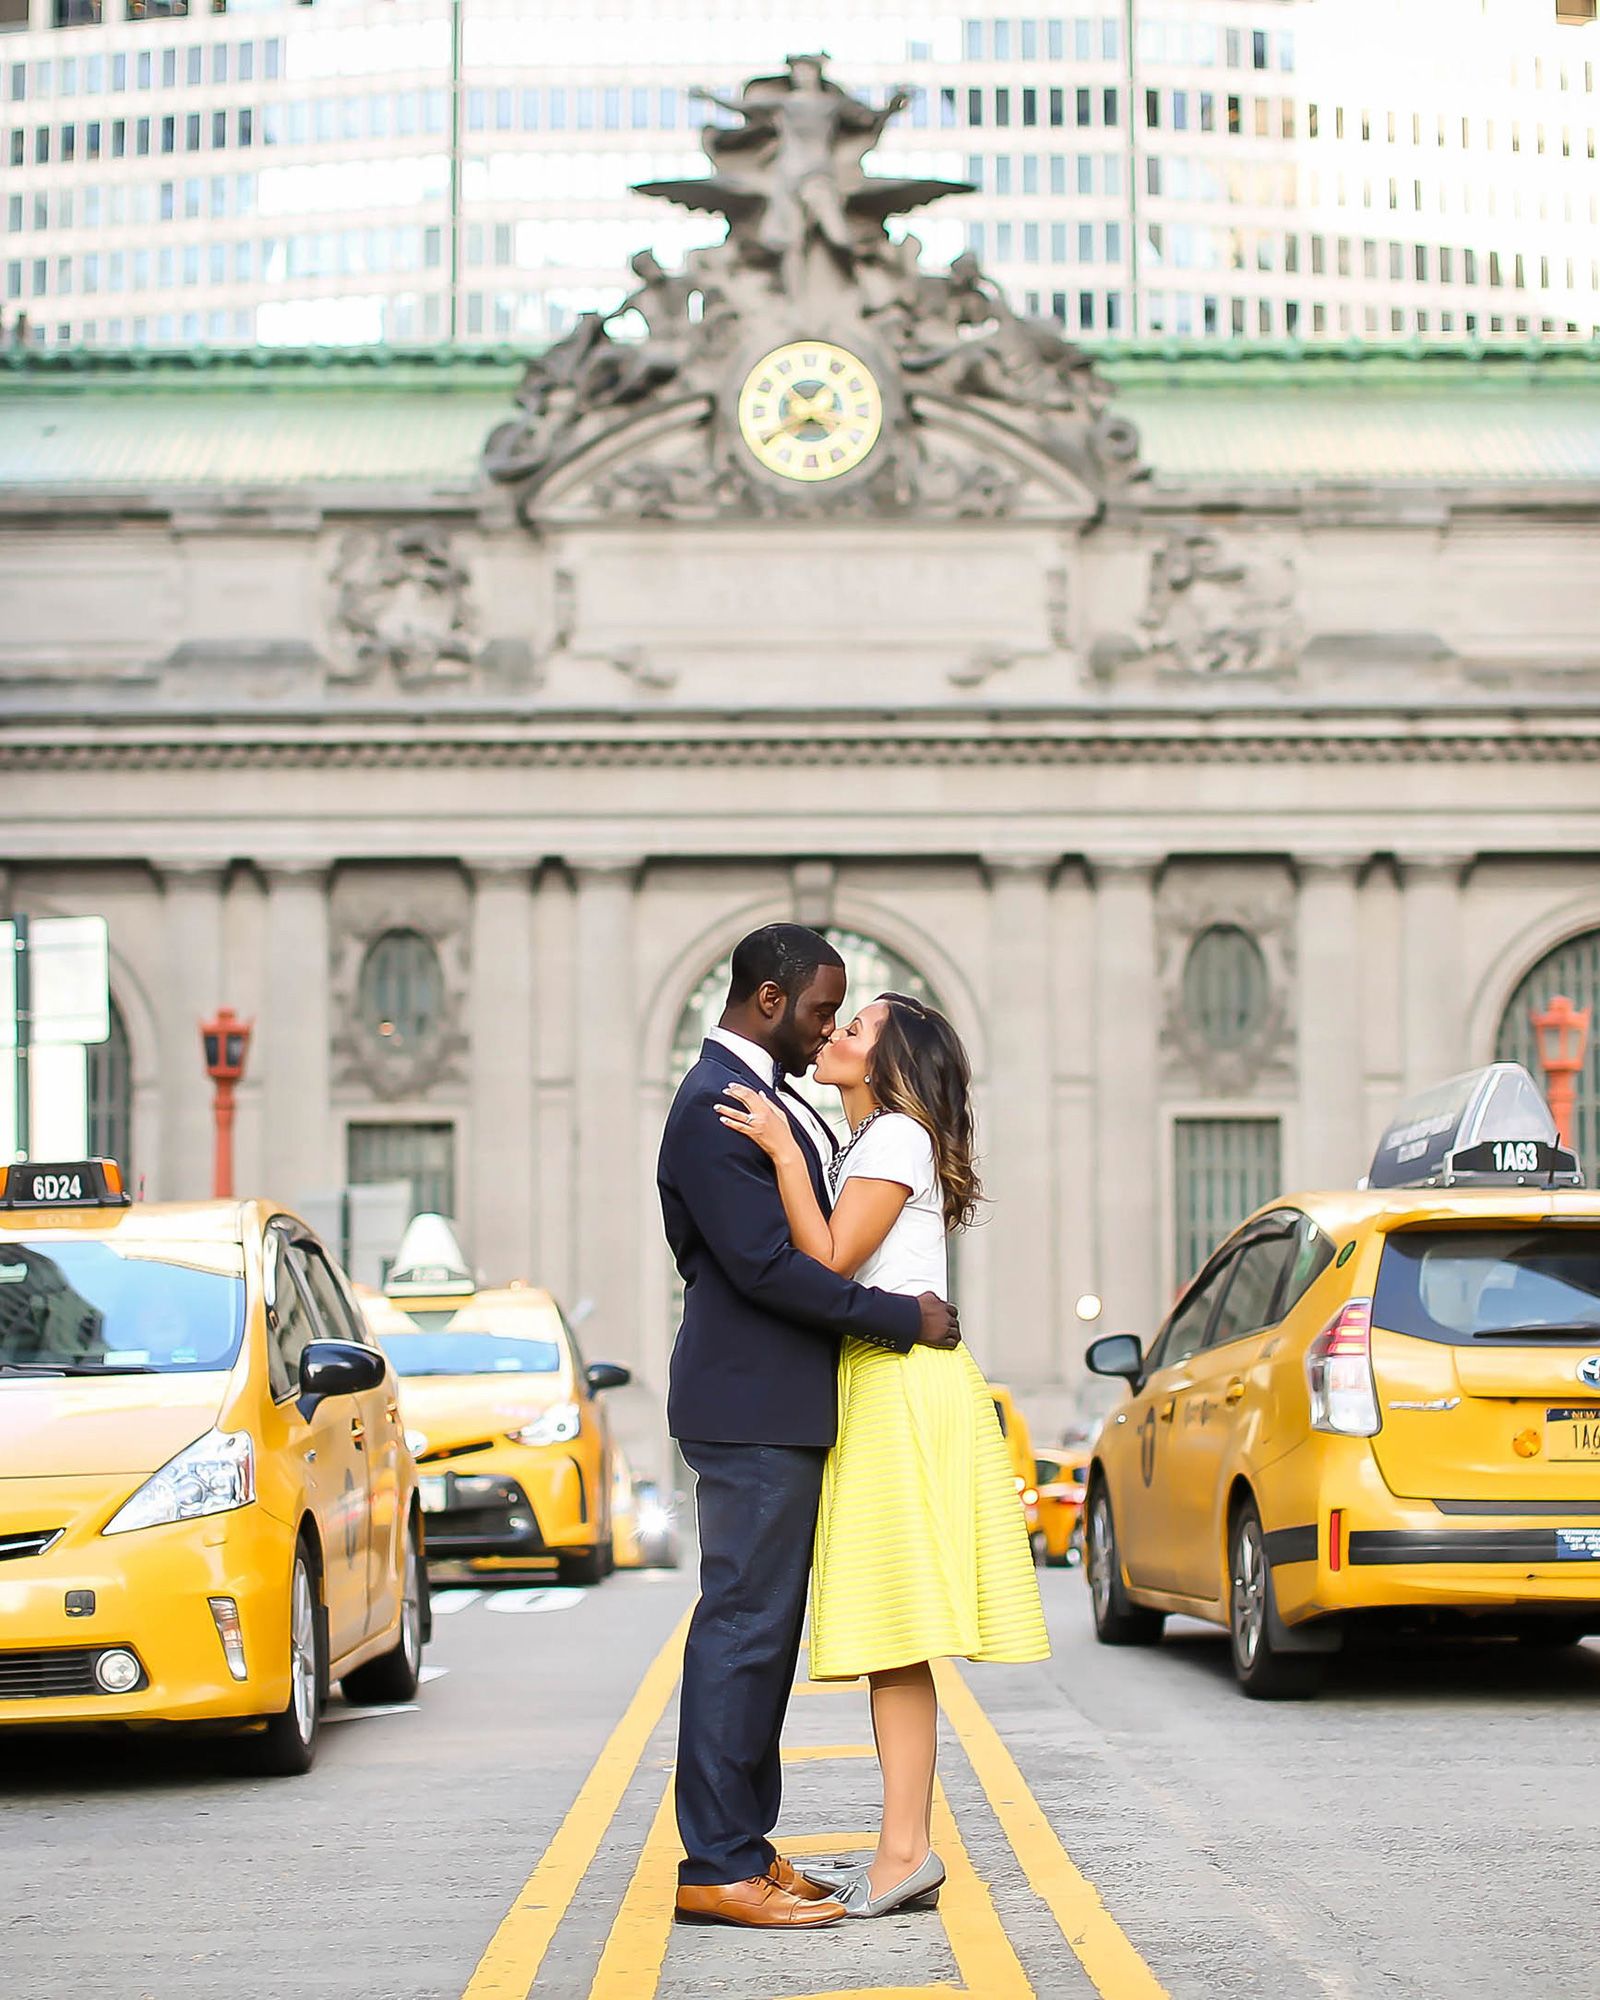 Engagement Photo in middle of street - New York City